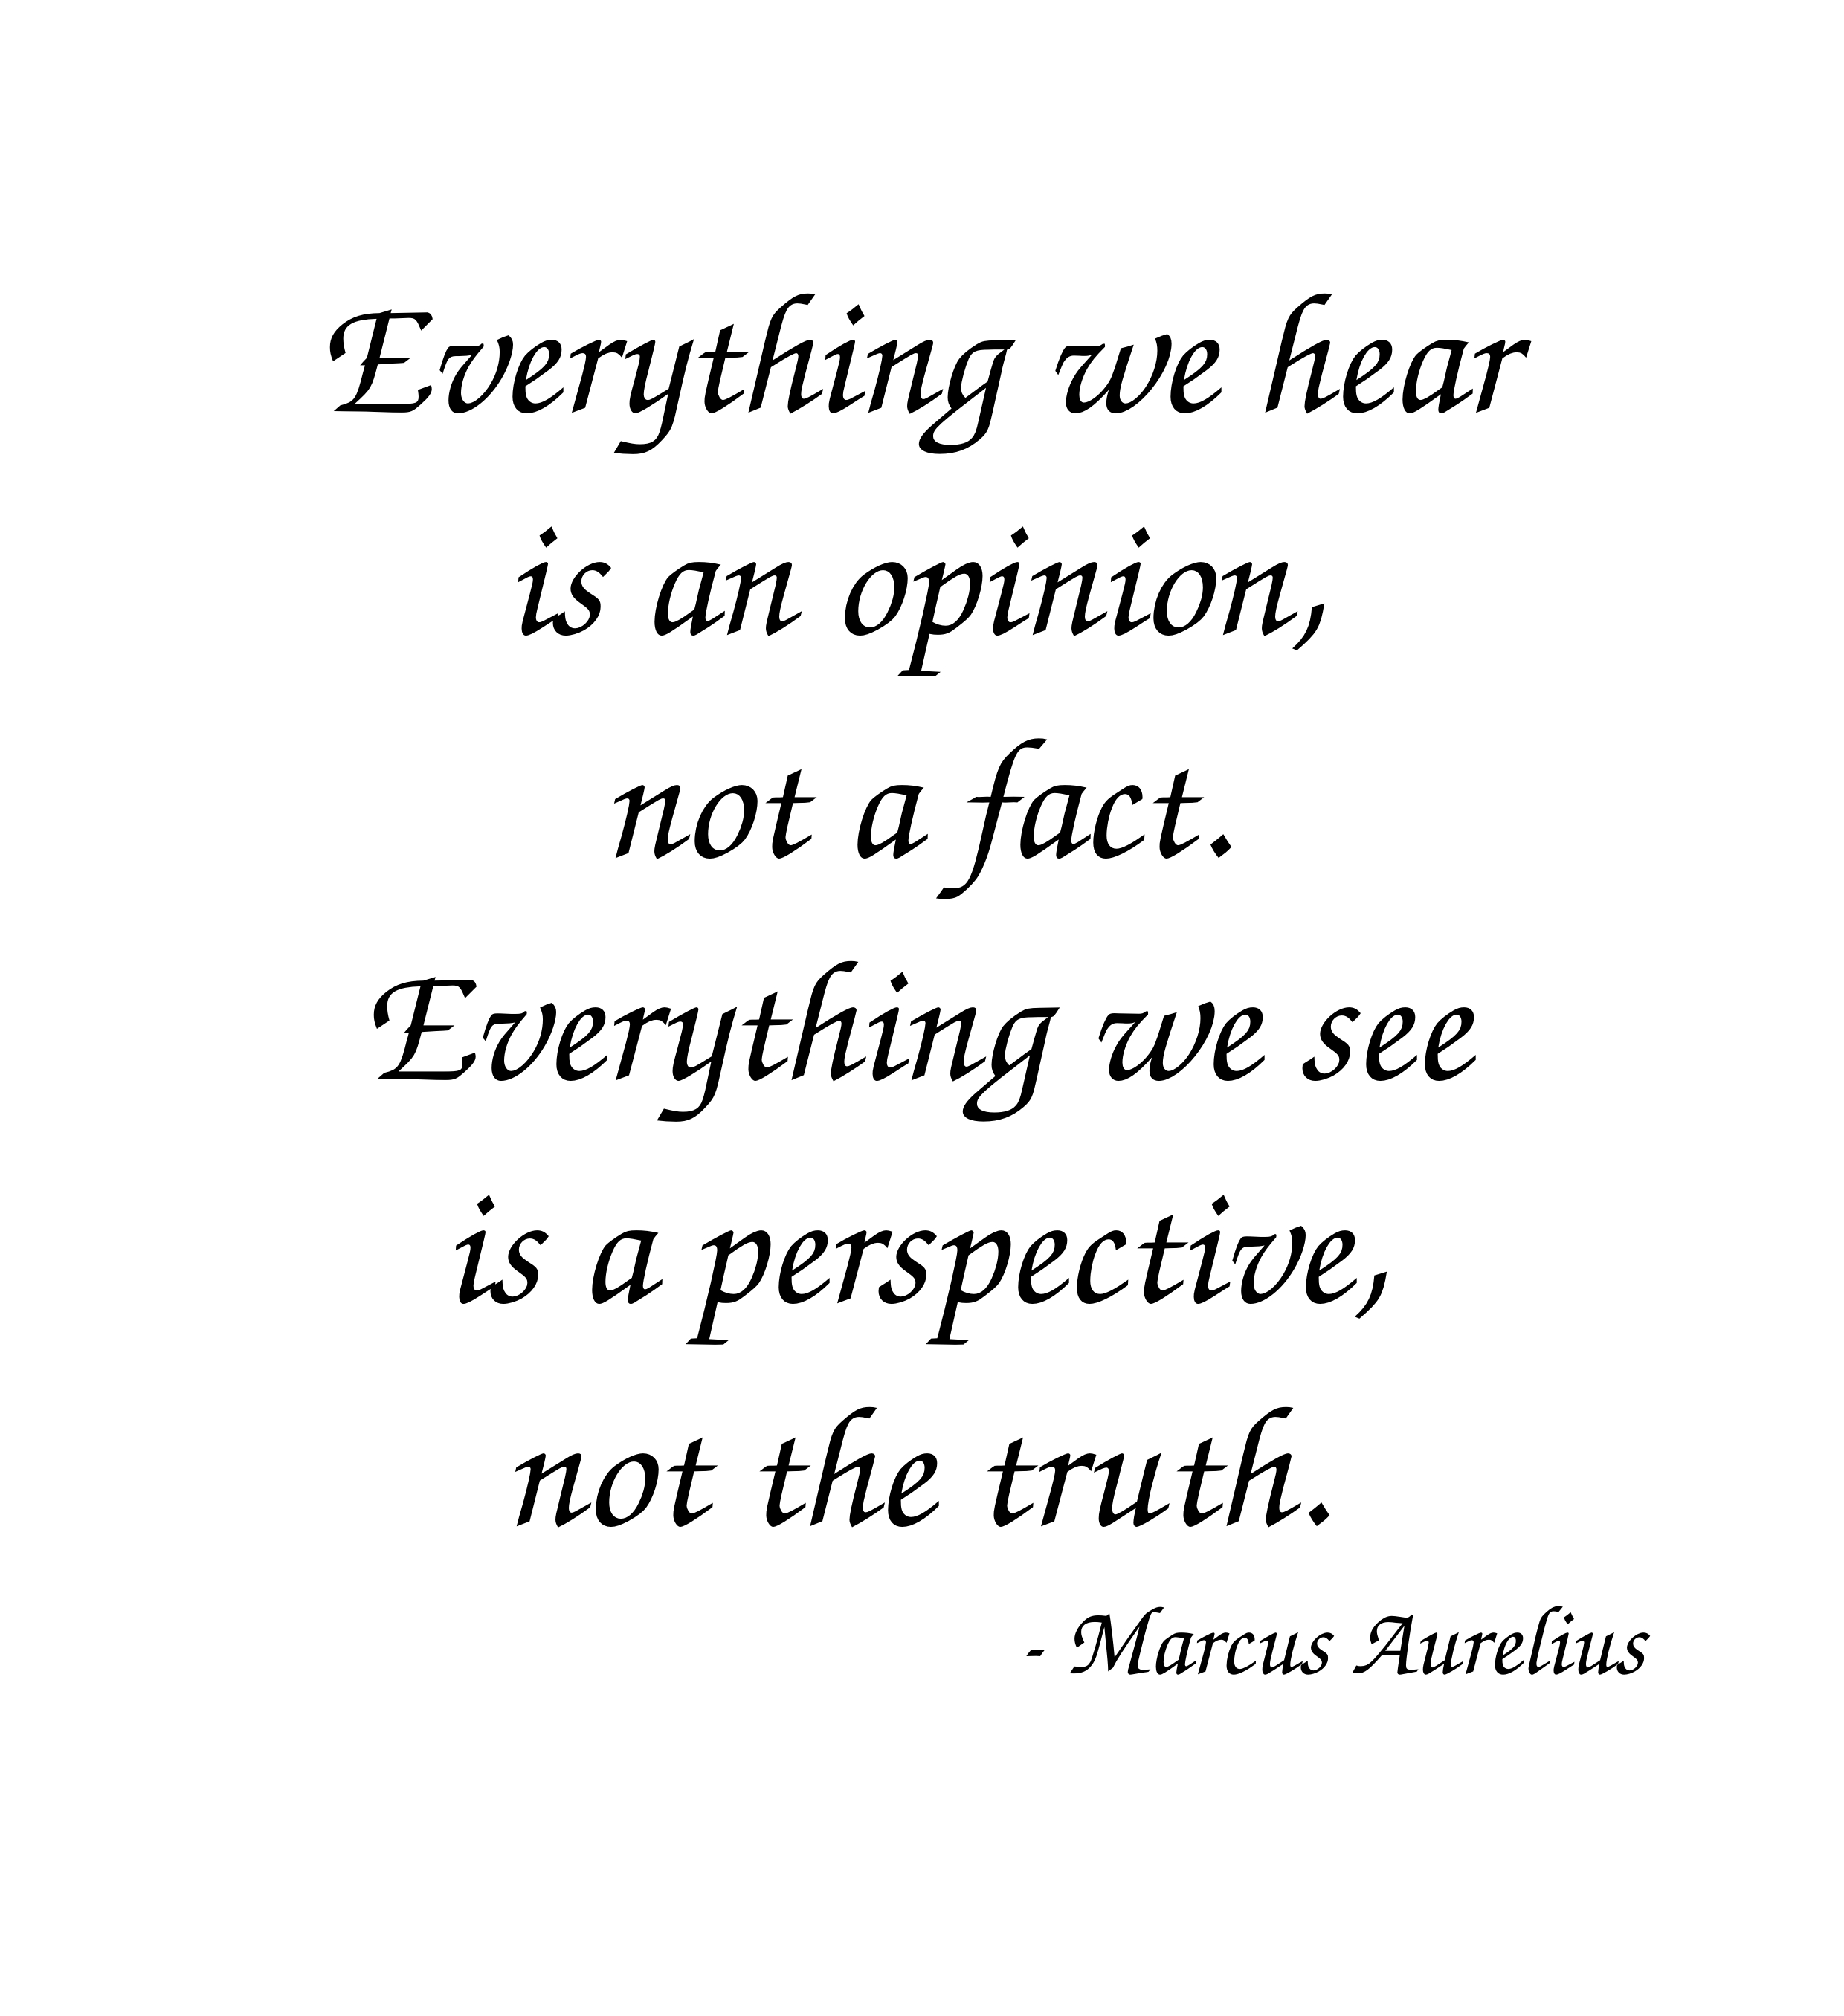 Marcus Aurelius Quote: Everything we hear is an opinion, not a fact. Everything we see is a perspective, not the truth.